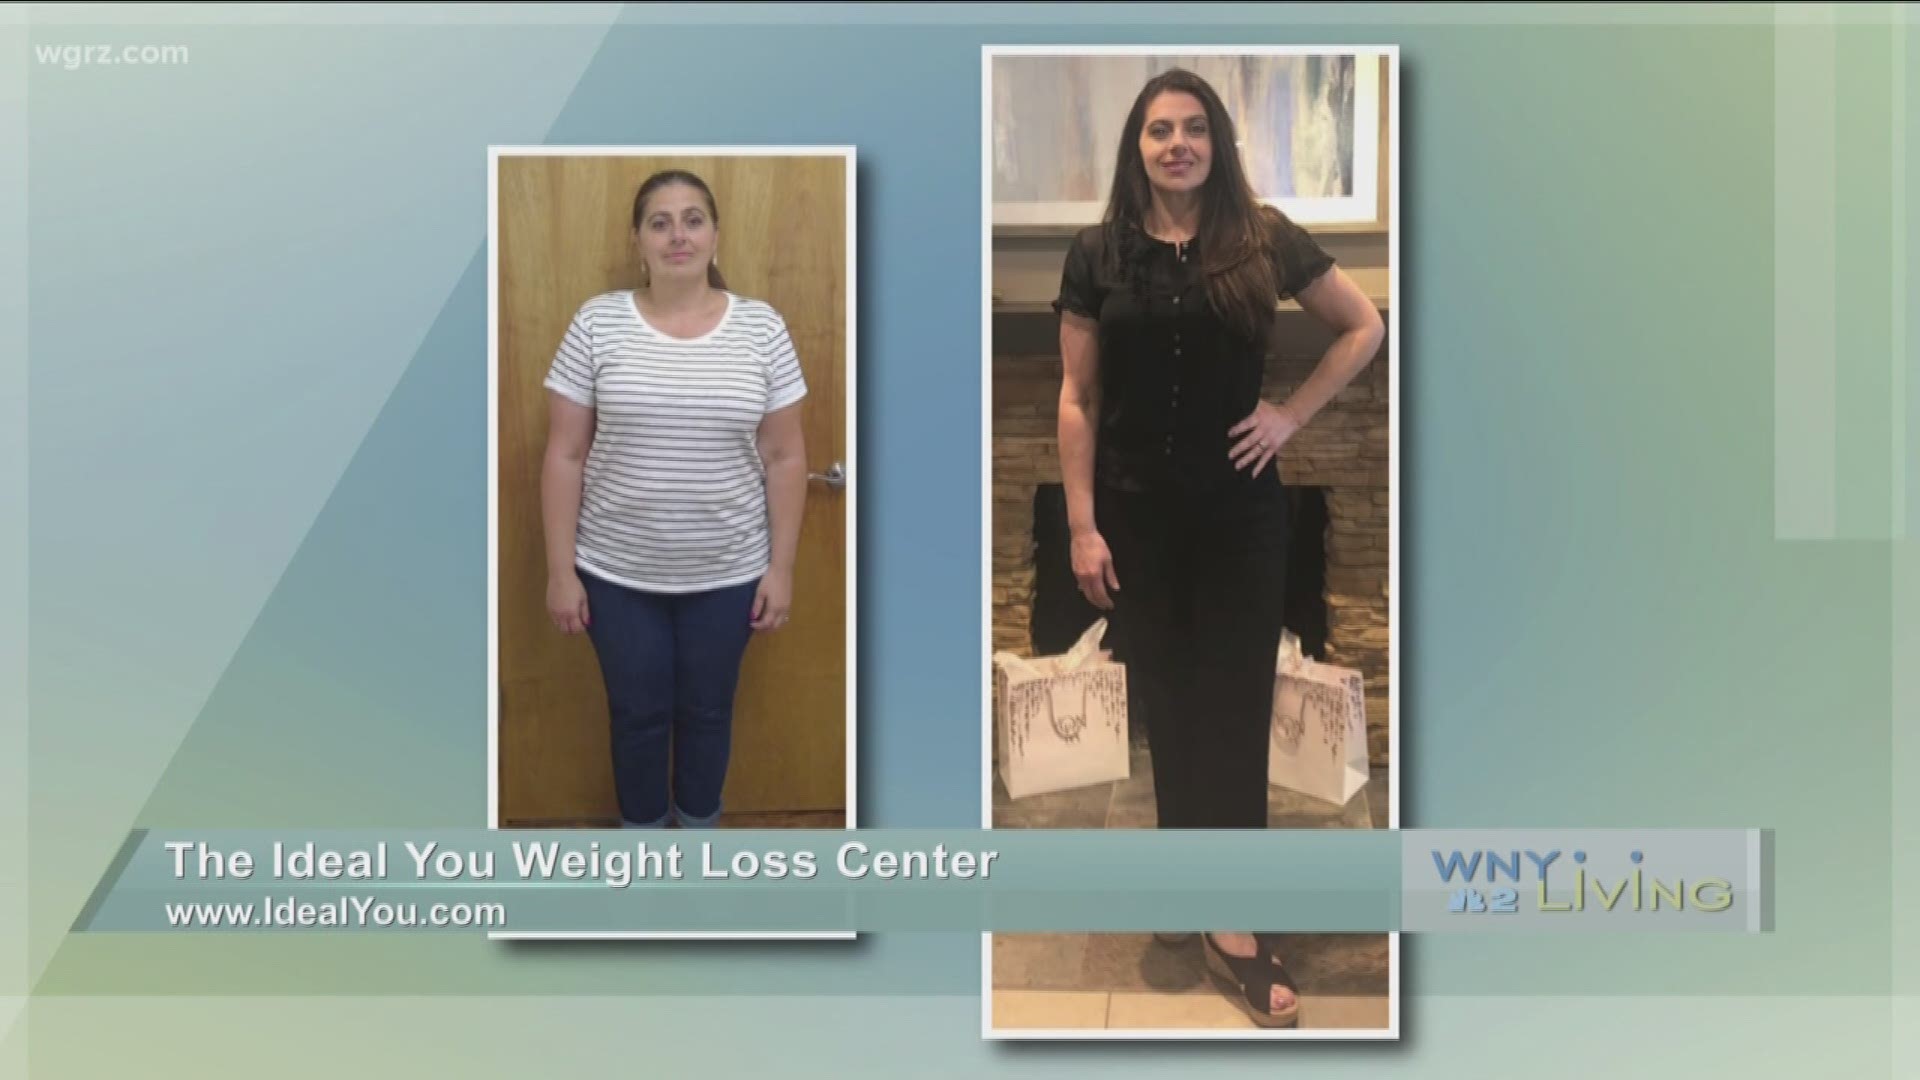 WNY Living - June 15 - The Ideal You Weight Loss Center (SPONSORED CONTENT)